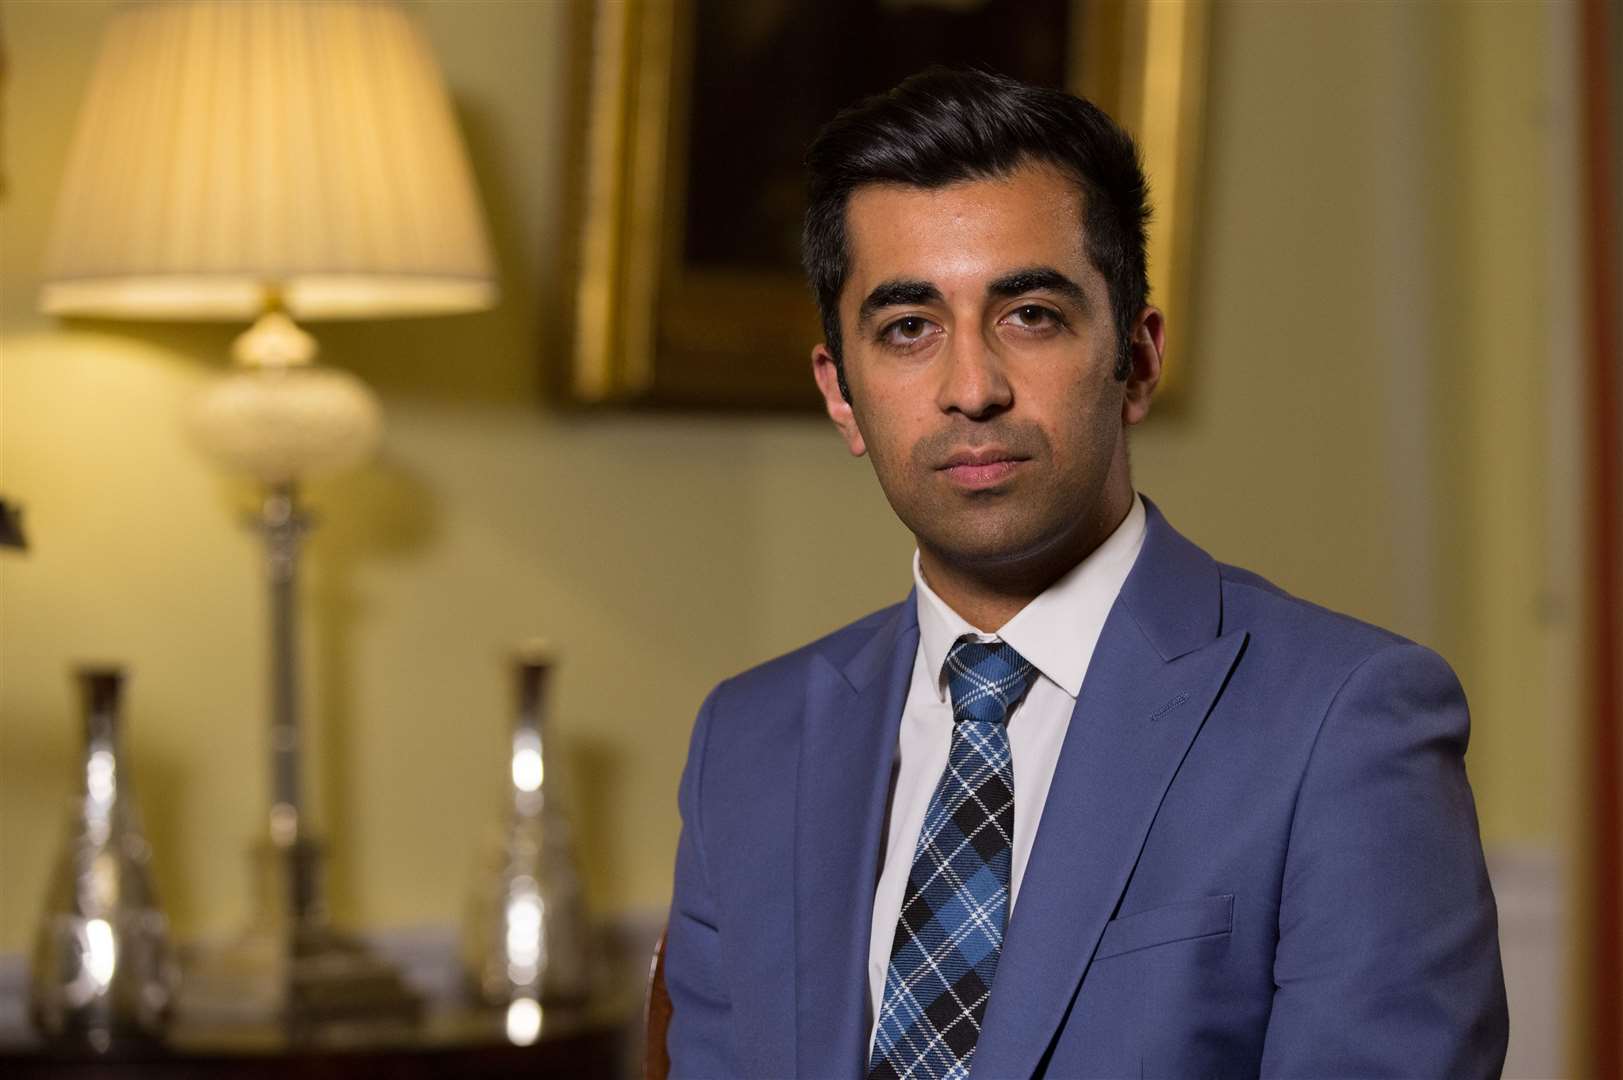 Justice secretary Humza Yousaf has announced an amendment to the Hate Crime bill.